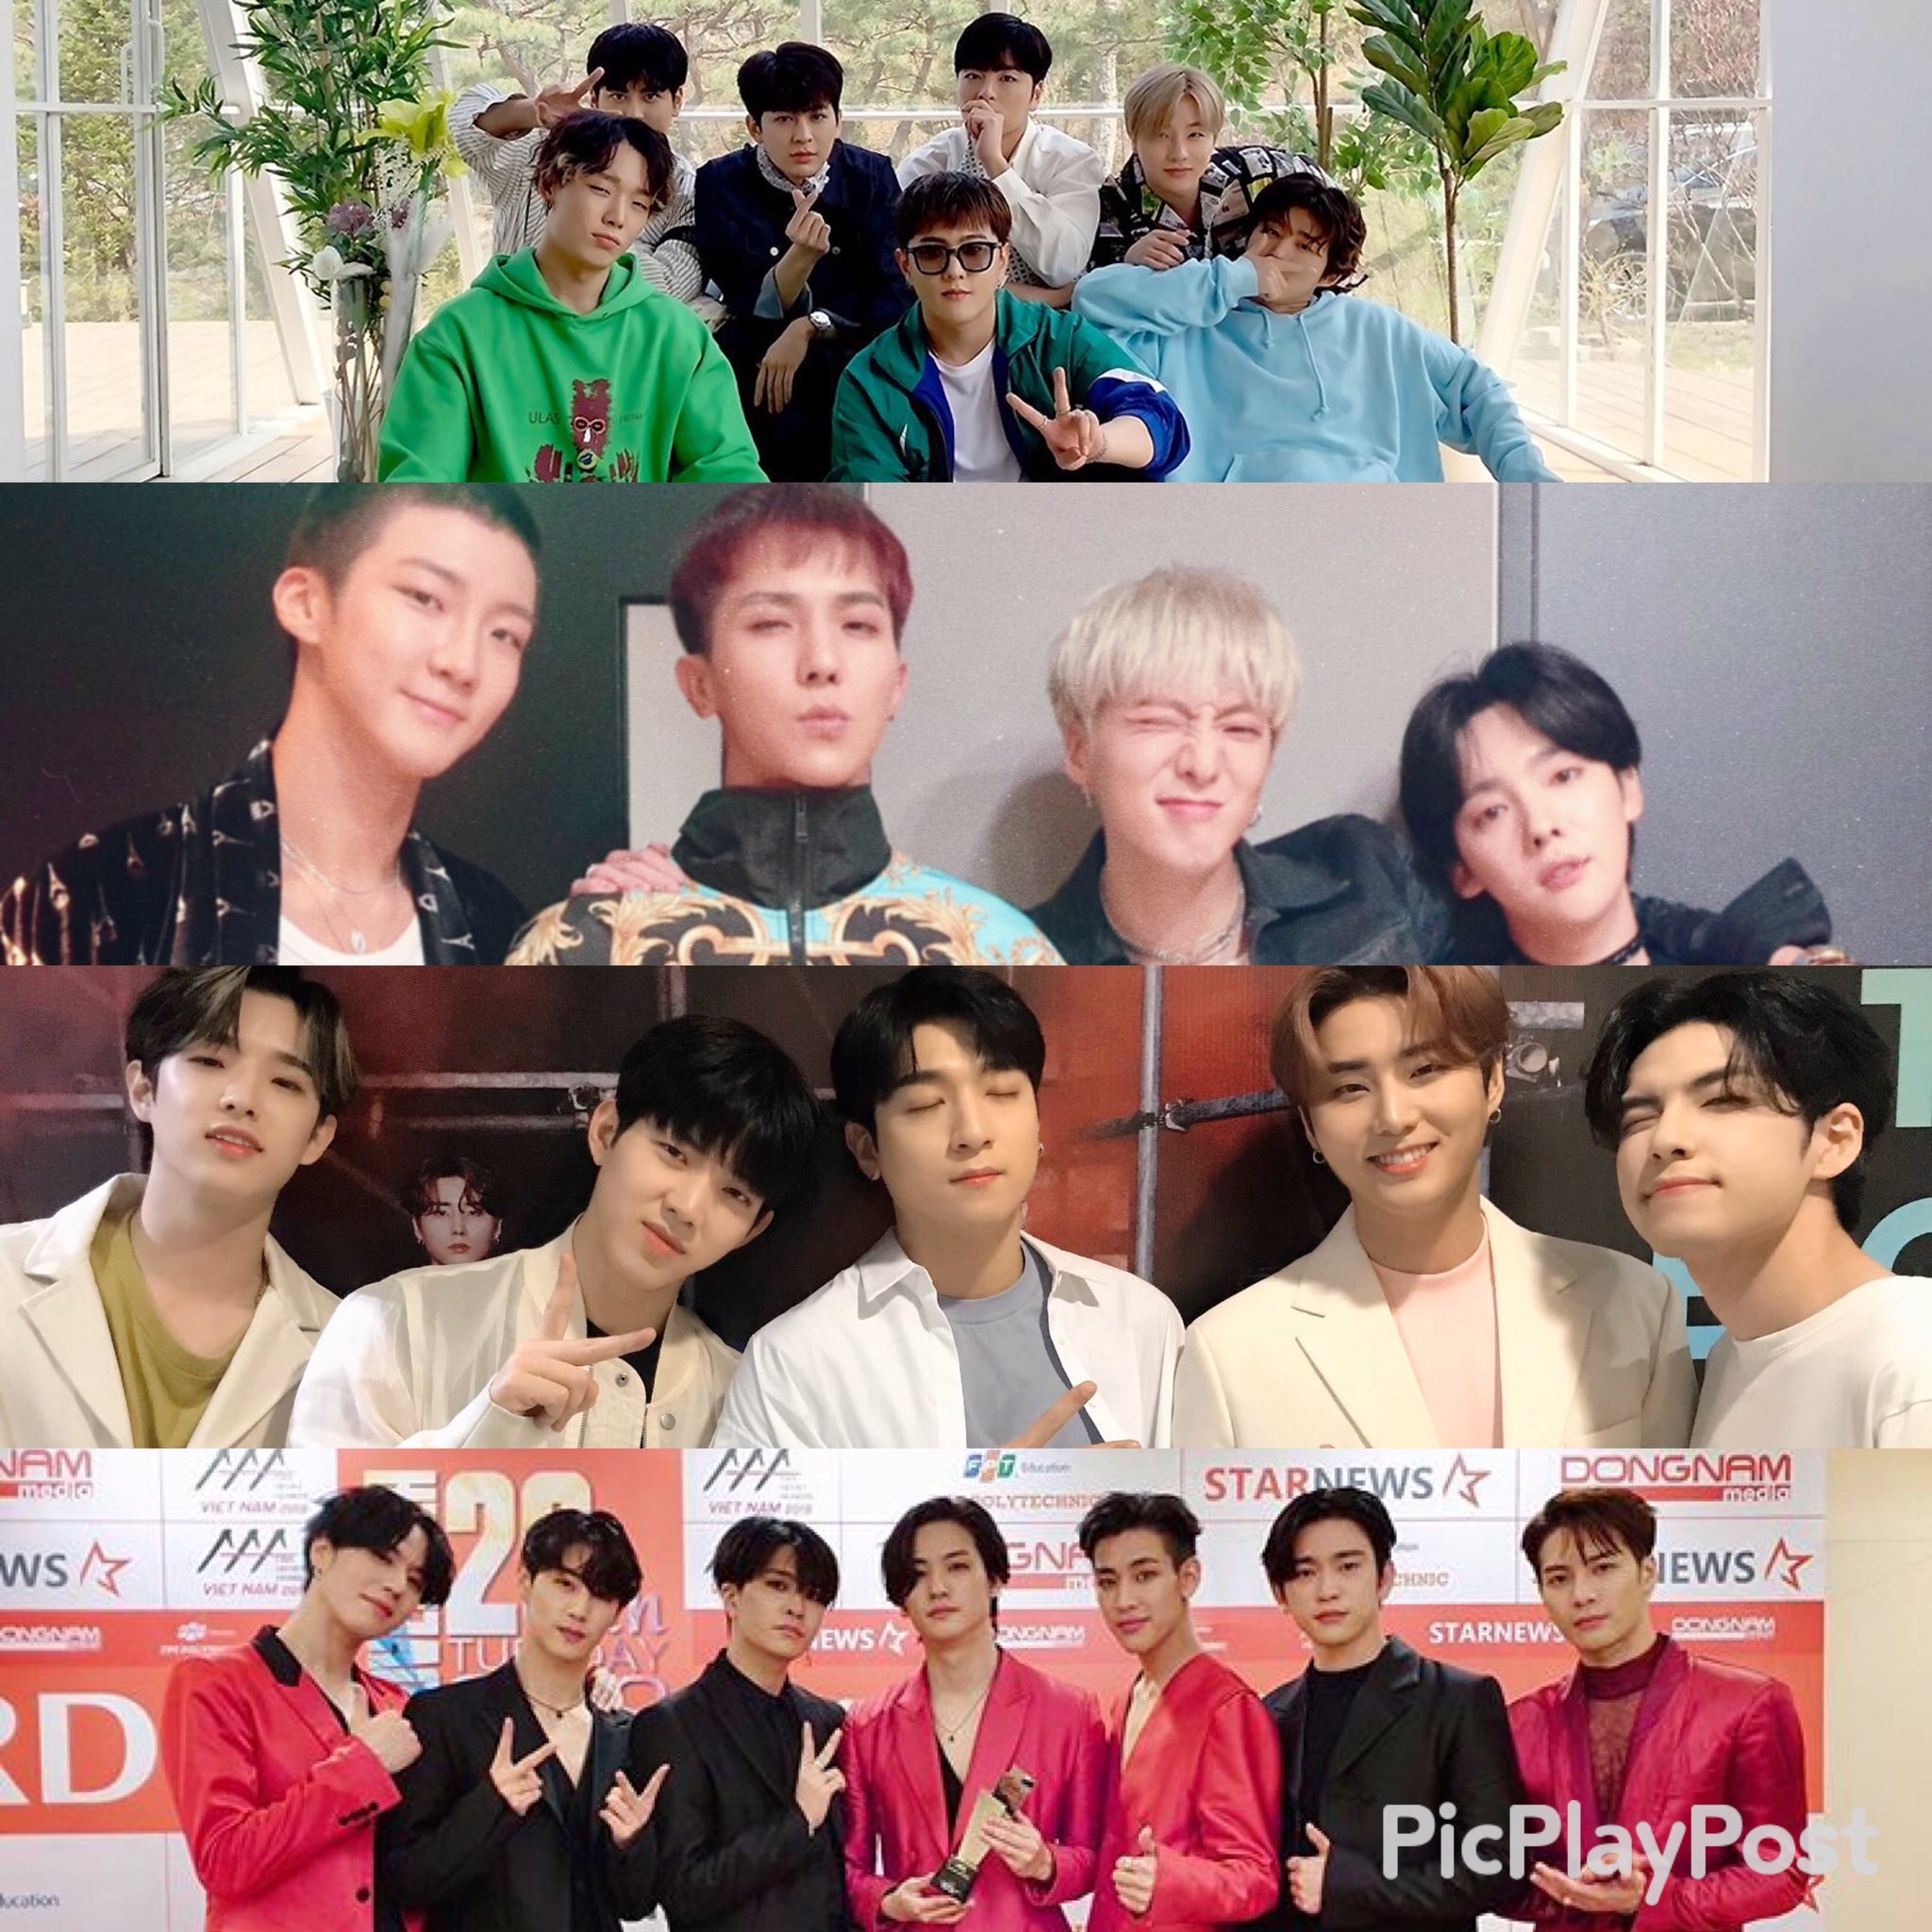 Ikon Winner Ikon Winner Day6 Amp Got7 Day6 Amp Got7 At The Beginning At The End Of The Decade Of The Decade The Glow Up T Co Nolwtxiimh Twitter